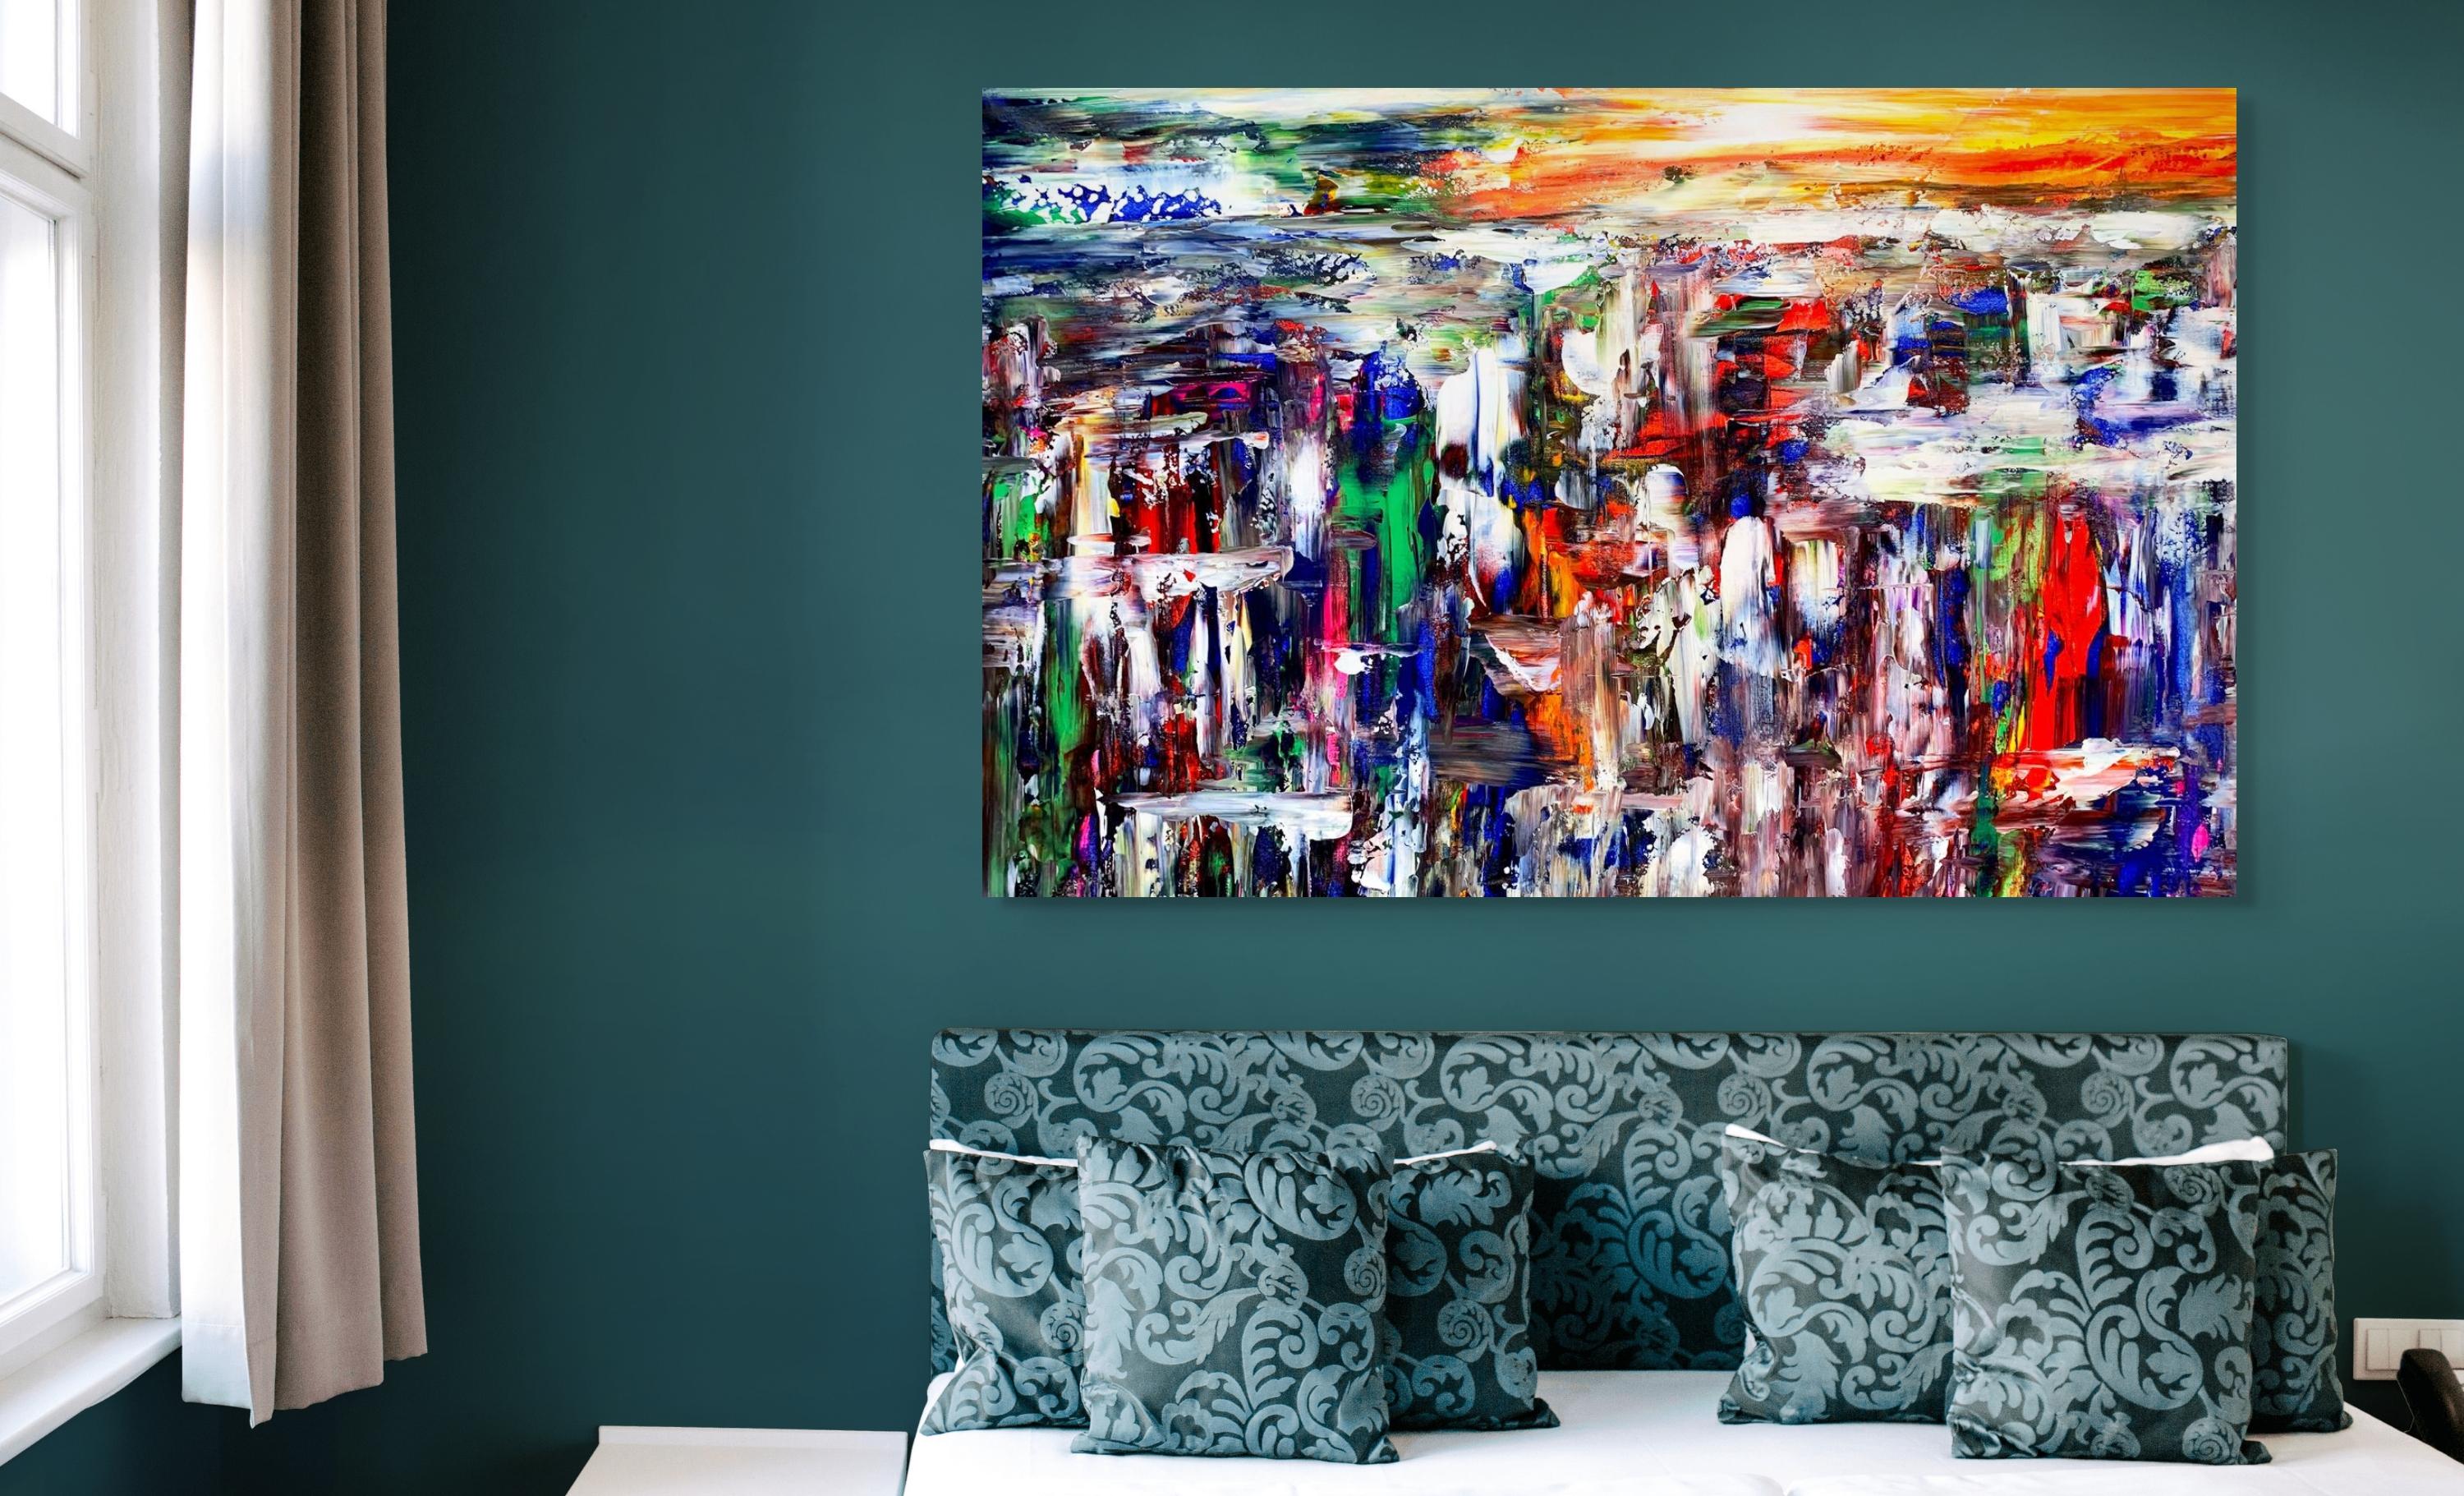 Sunset Osaka - Abstract Expressionist Painting by Estelle Asmodelle